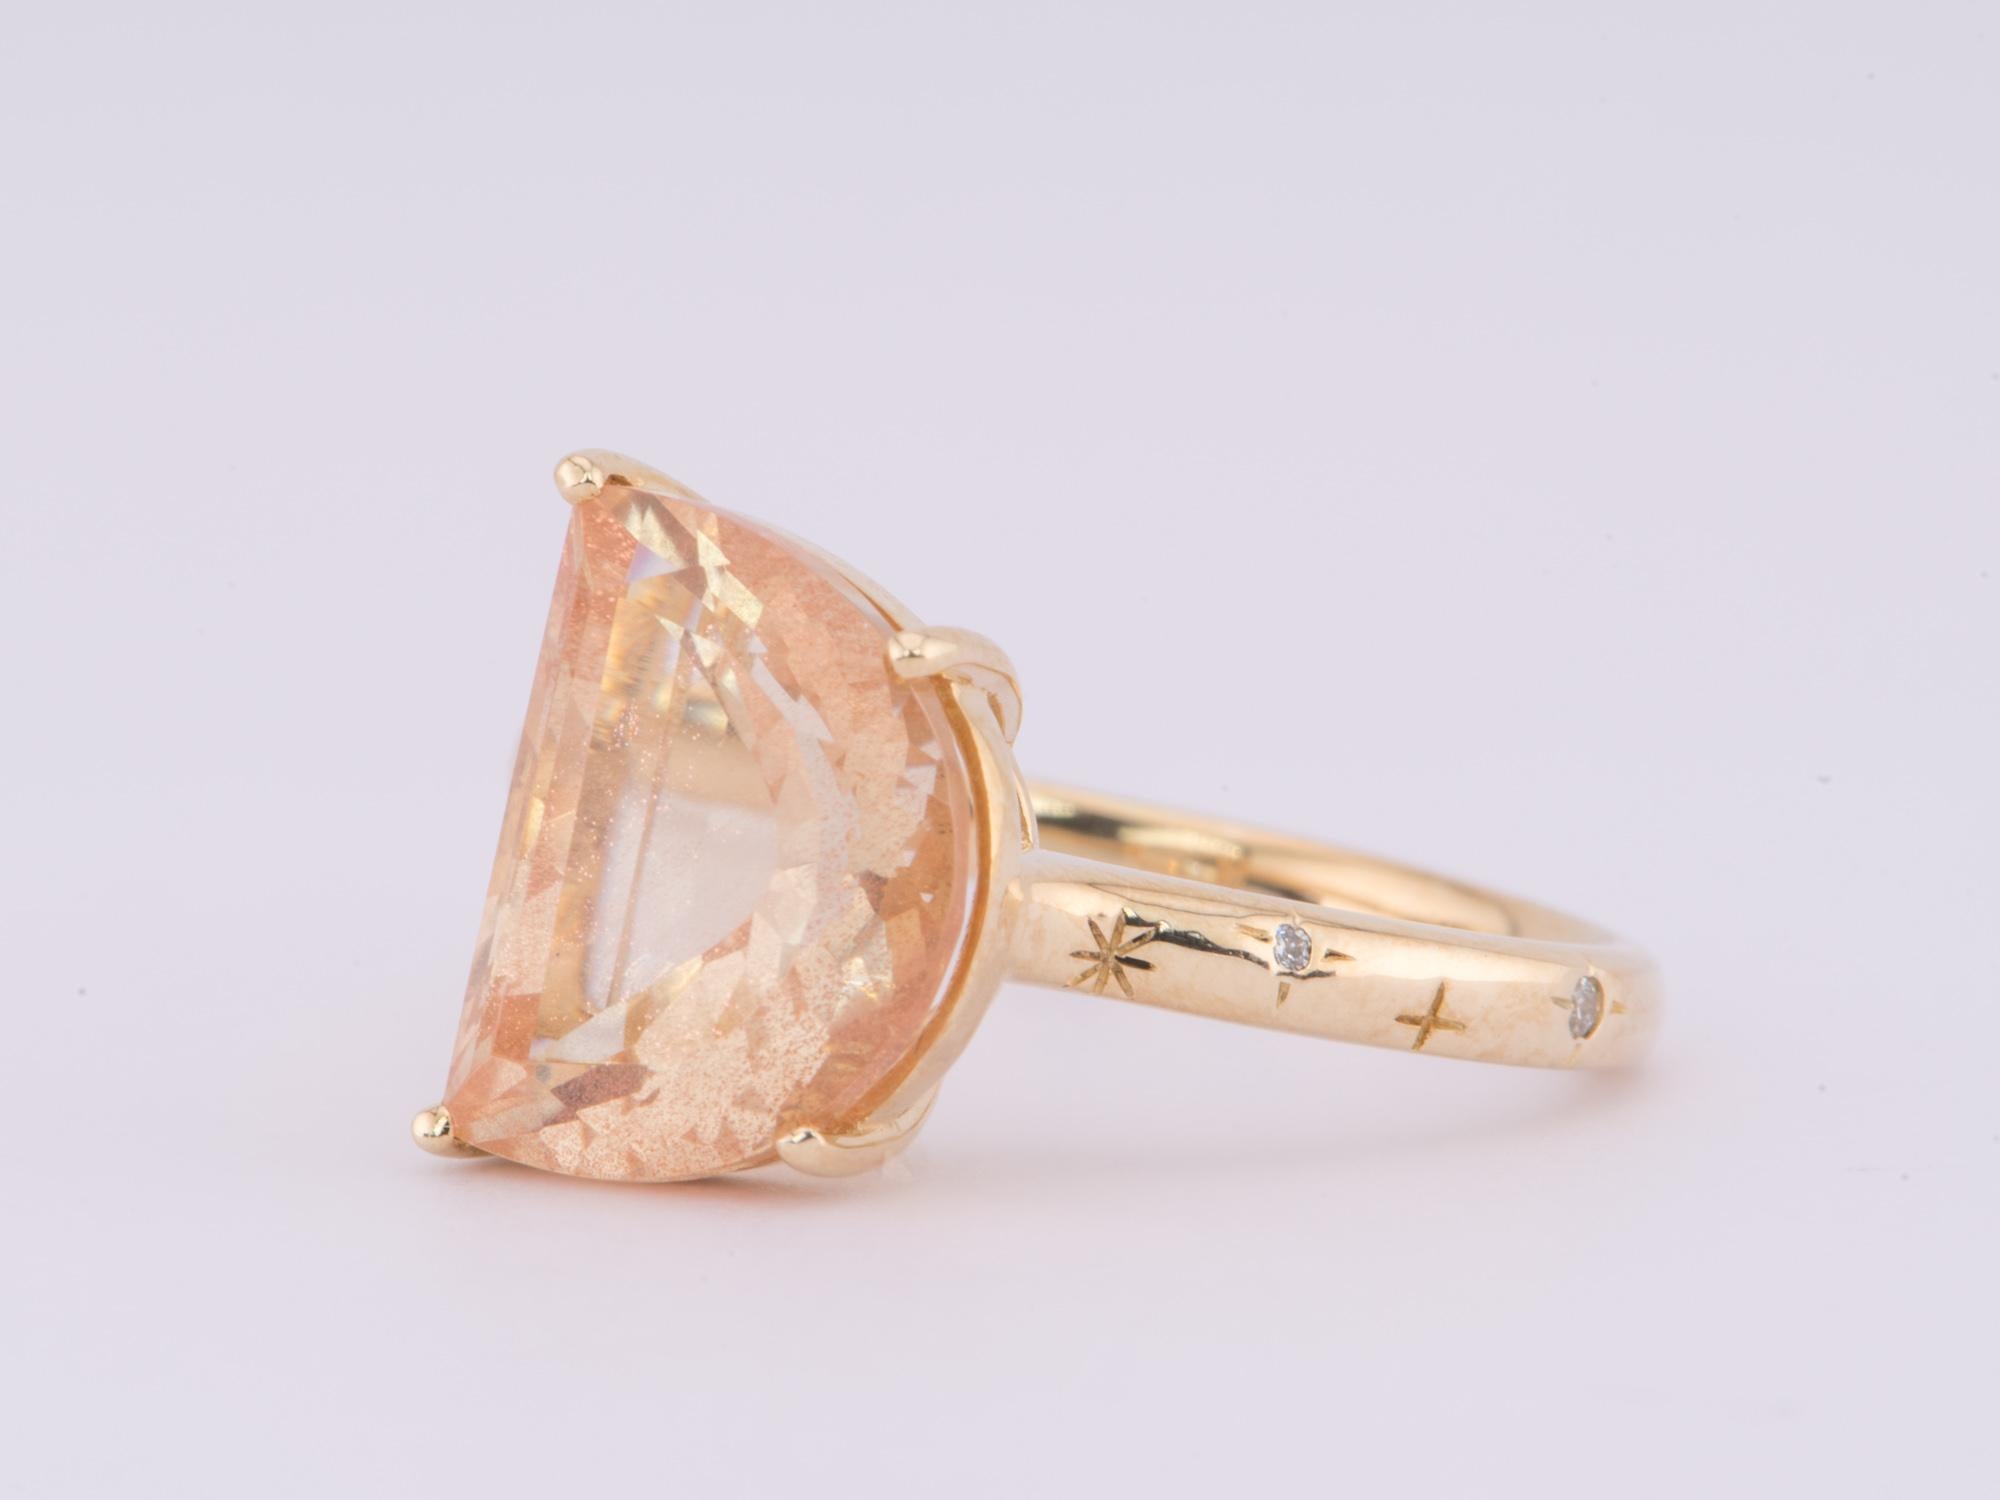 ♥ The item measures 12.8mm in length (North South direction), 9.5mm in width (East West direction), and stands 7.7mm tall from the finger. Band width is 2mm.
♥ Ring size: US Size 8 (Free resizing up or down 2 size2)
♥ Material: 14K Gold
♥ Gemstone: